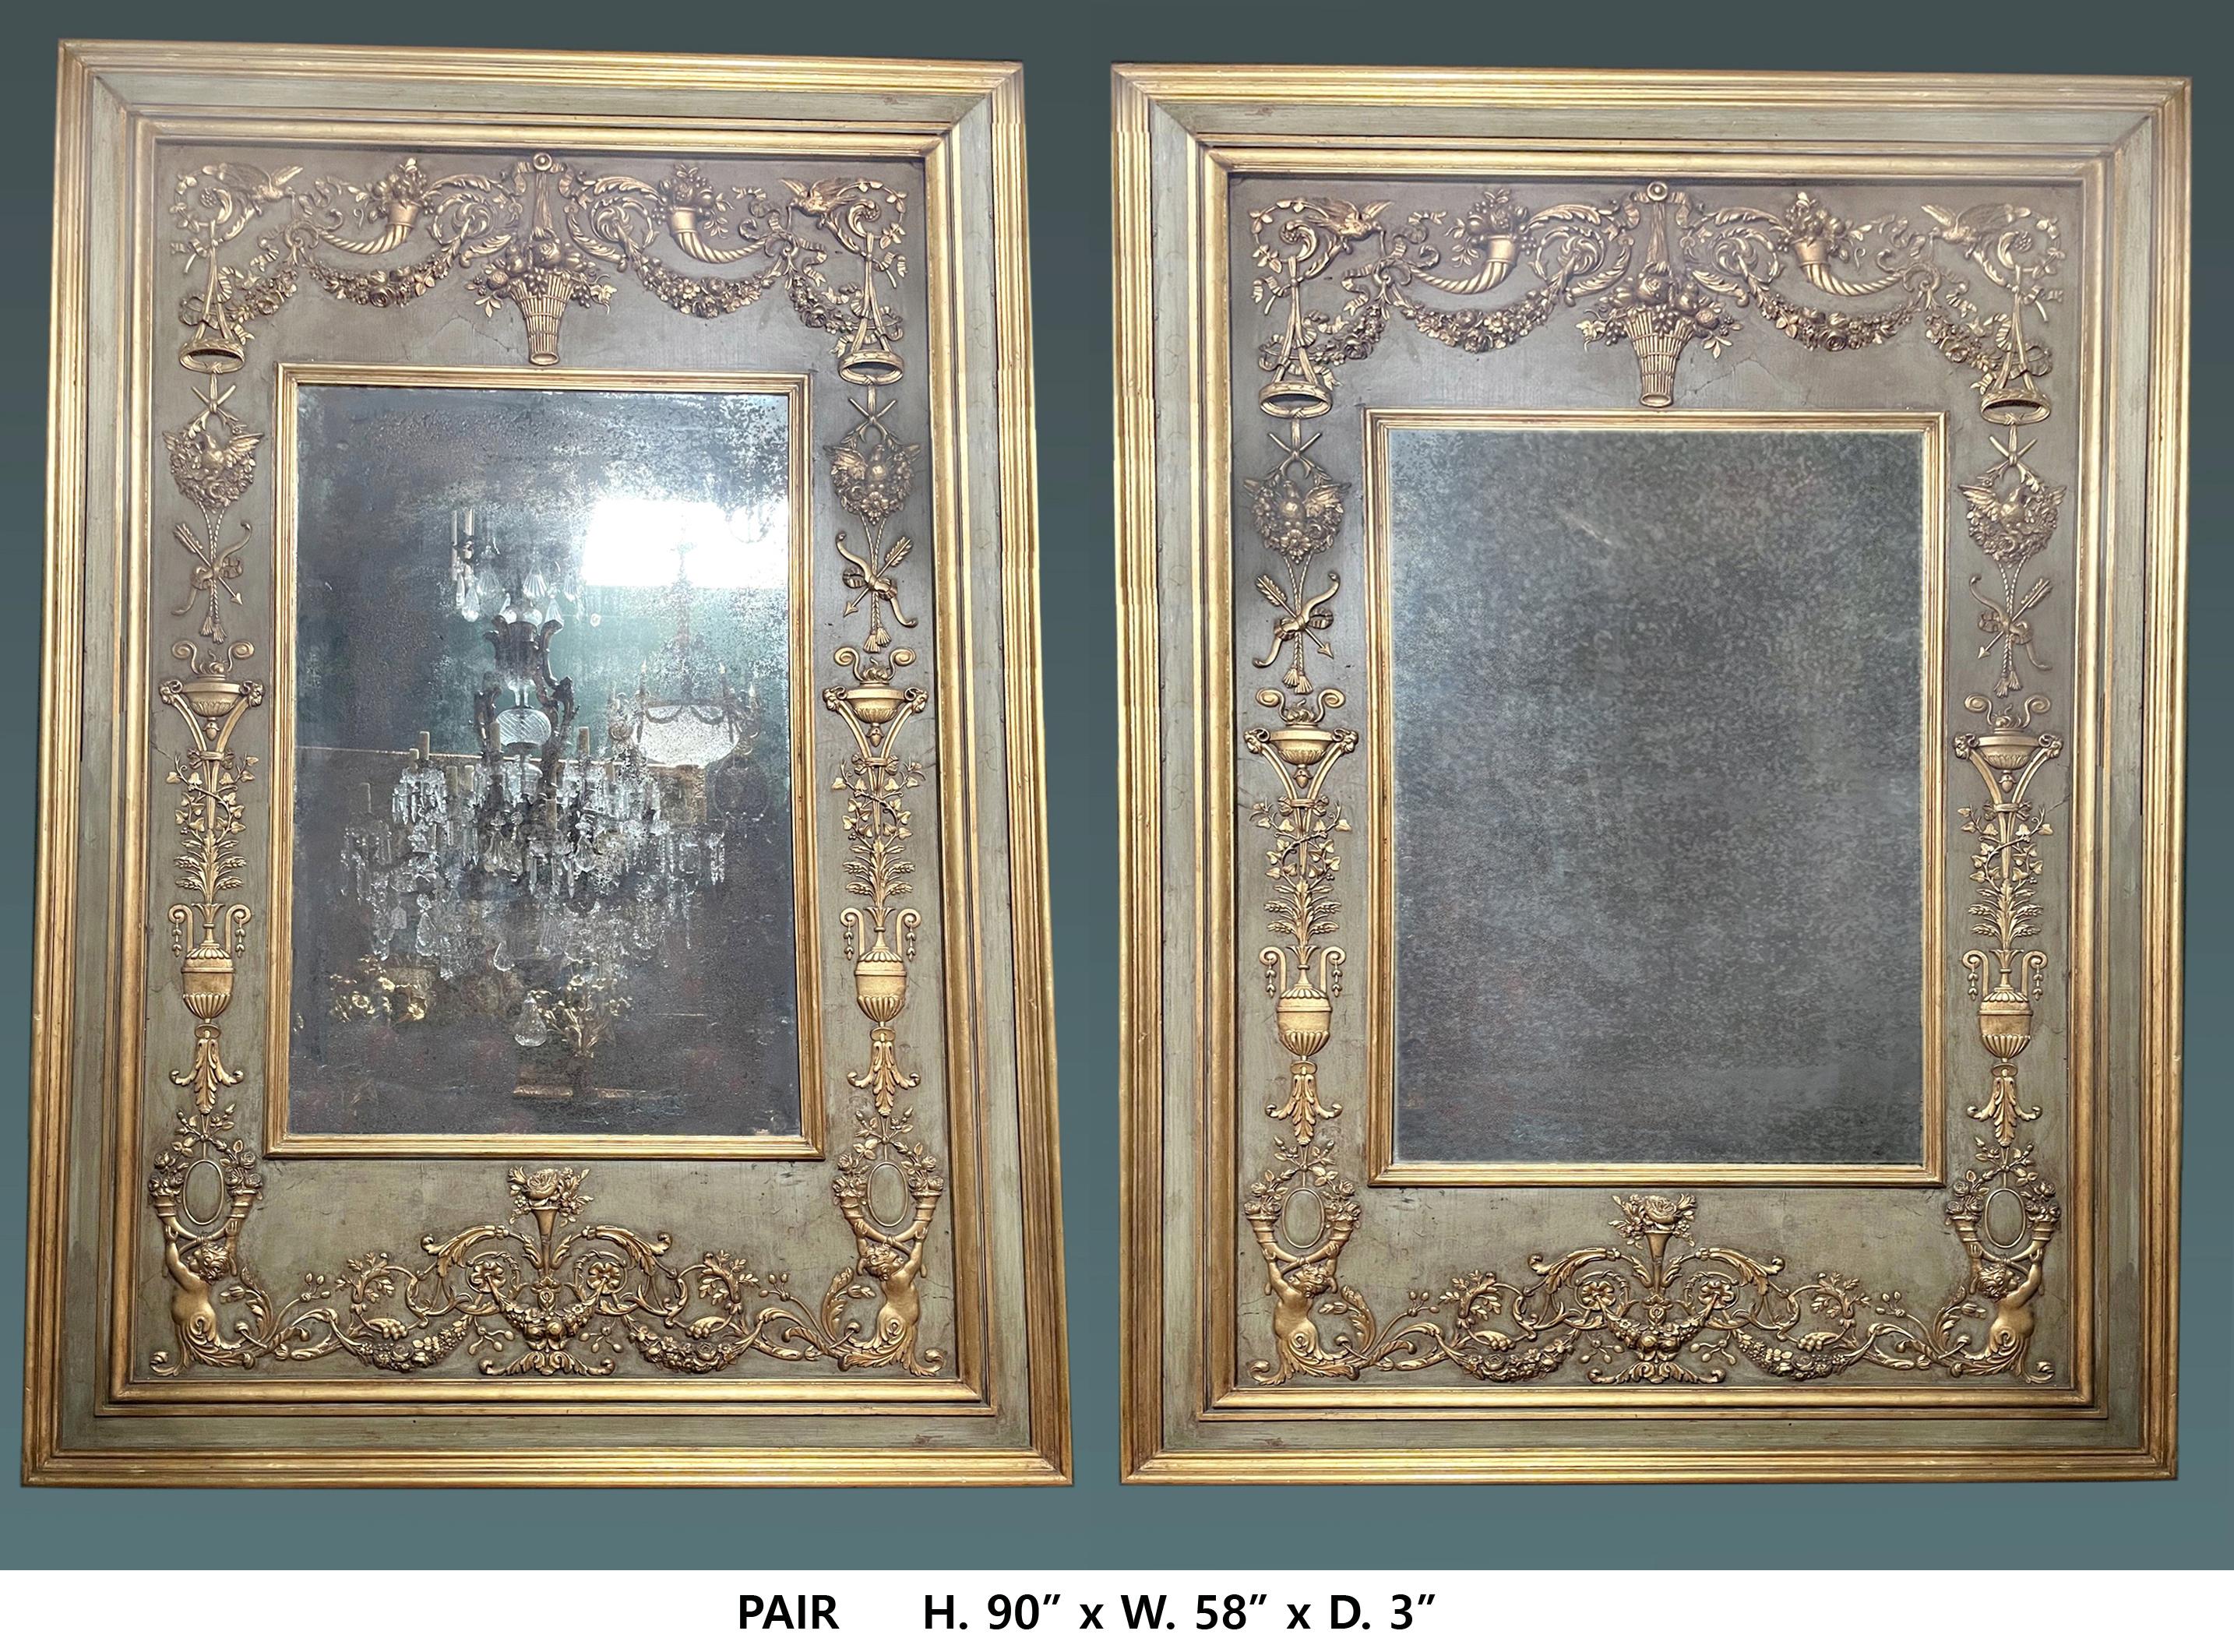 Exceptional monumental pair of 19 century Italian  partial gild and green painted decorated mirrors.
Meticulous attention has been given to every details..
With antique mirror plates.
Impressive statement in every home